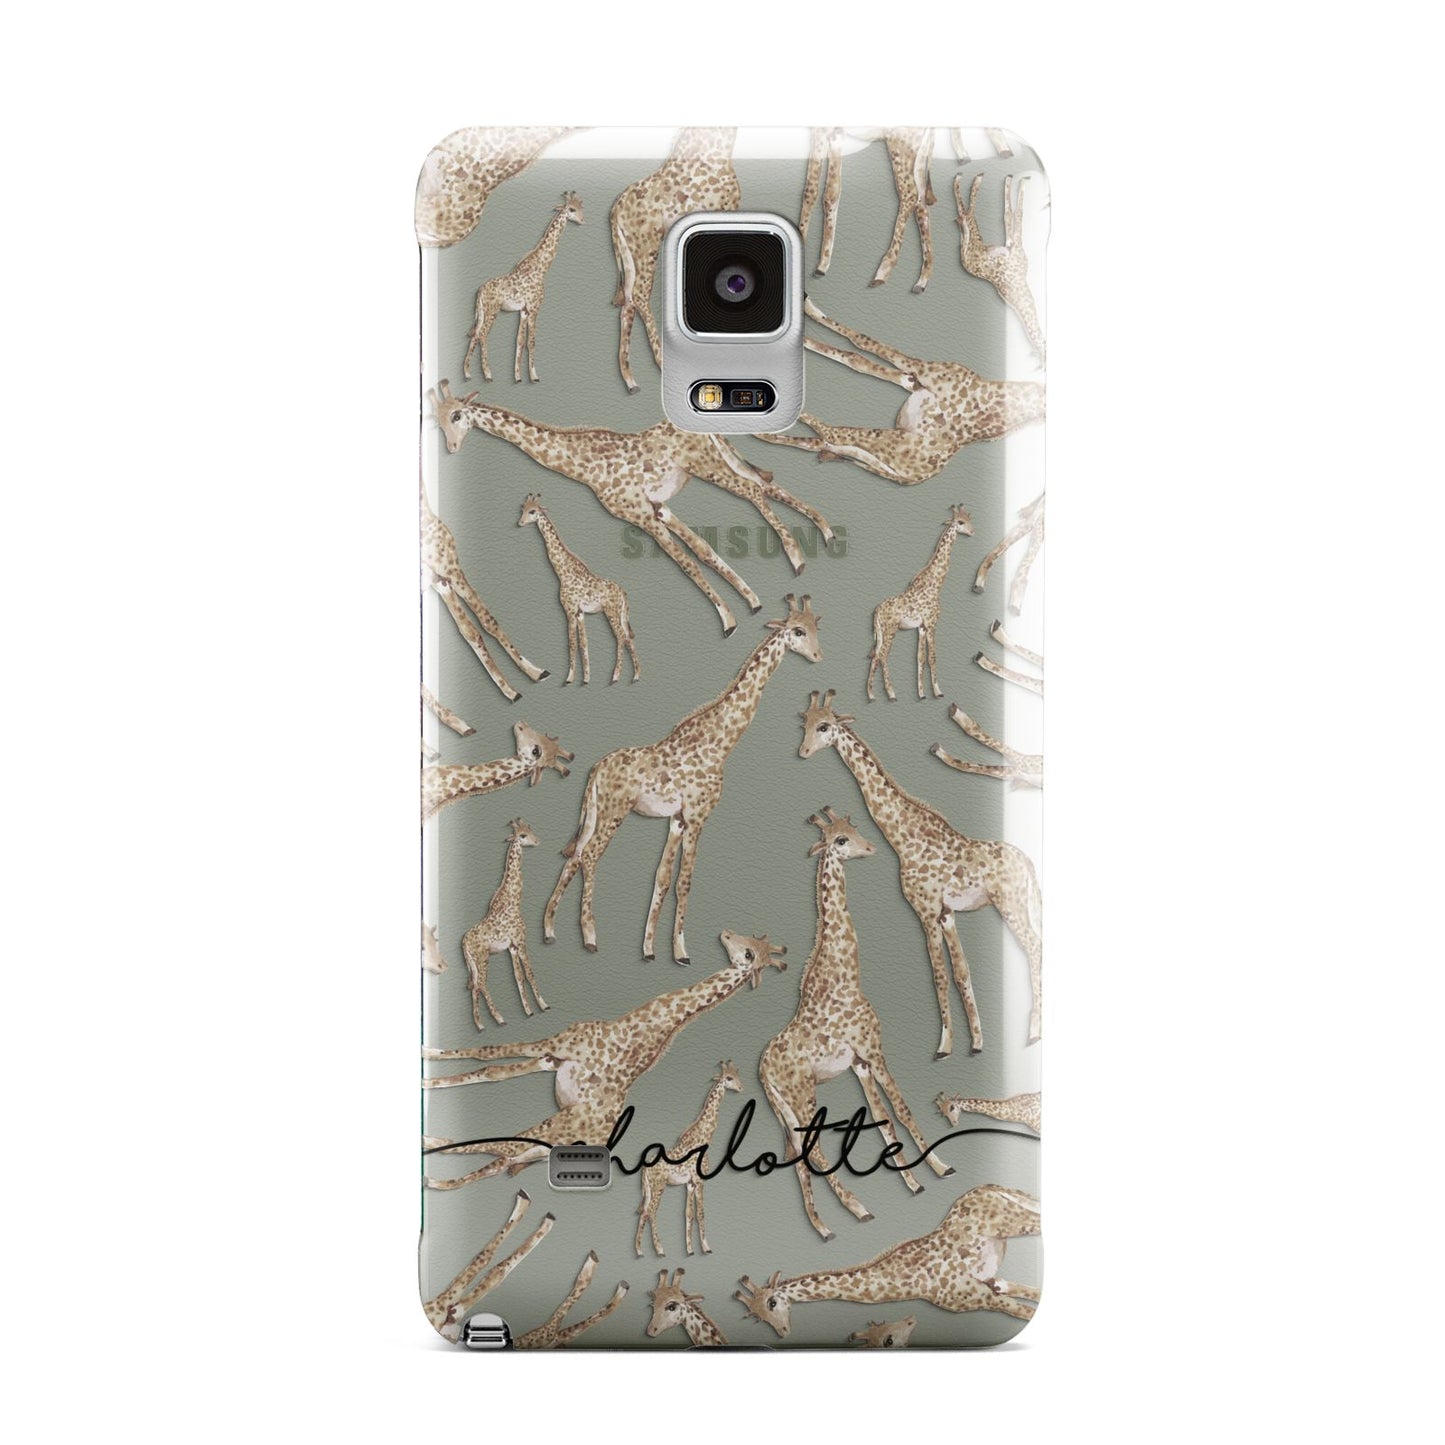 Personalised Giraffes with Name Samsung Galaxy Note 4 Case